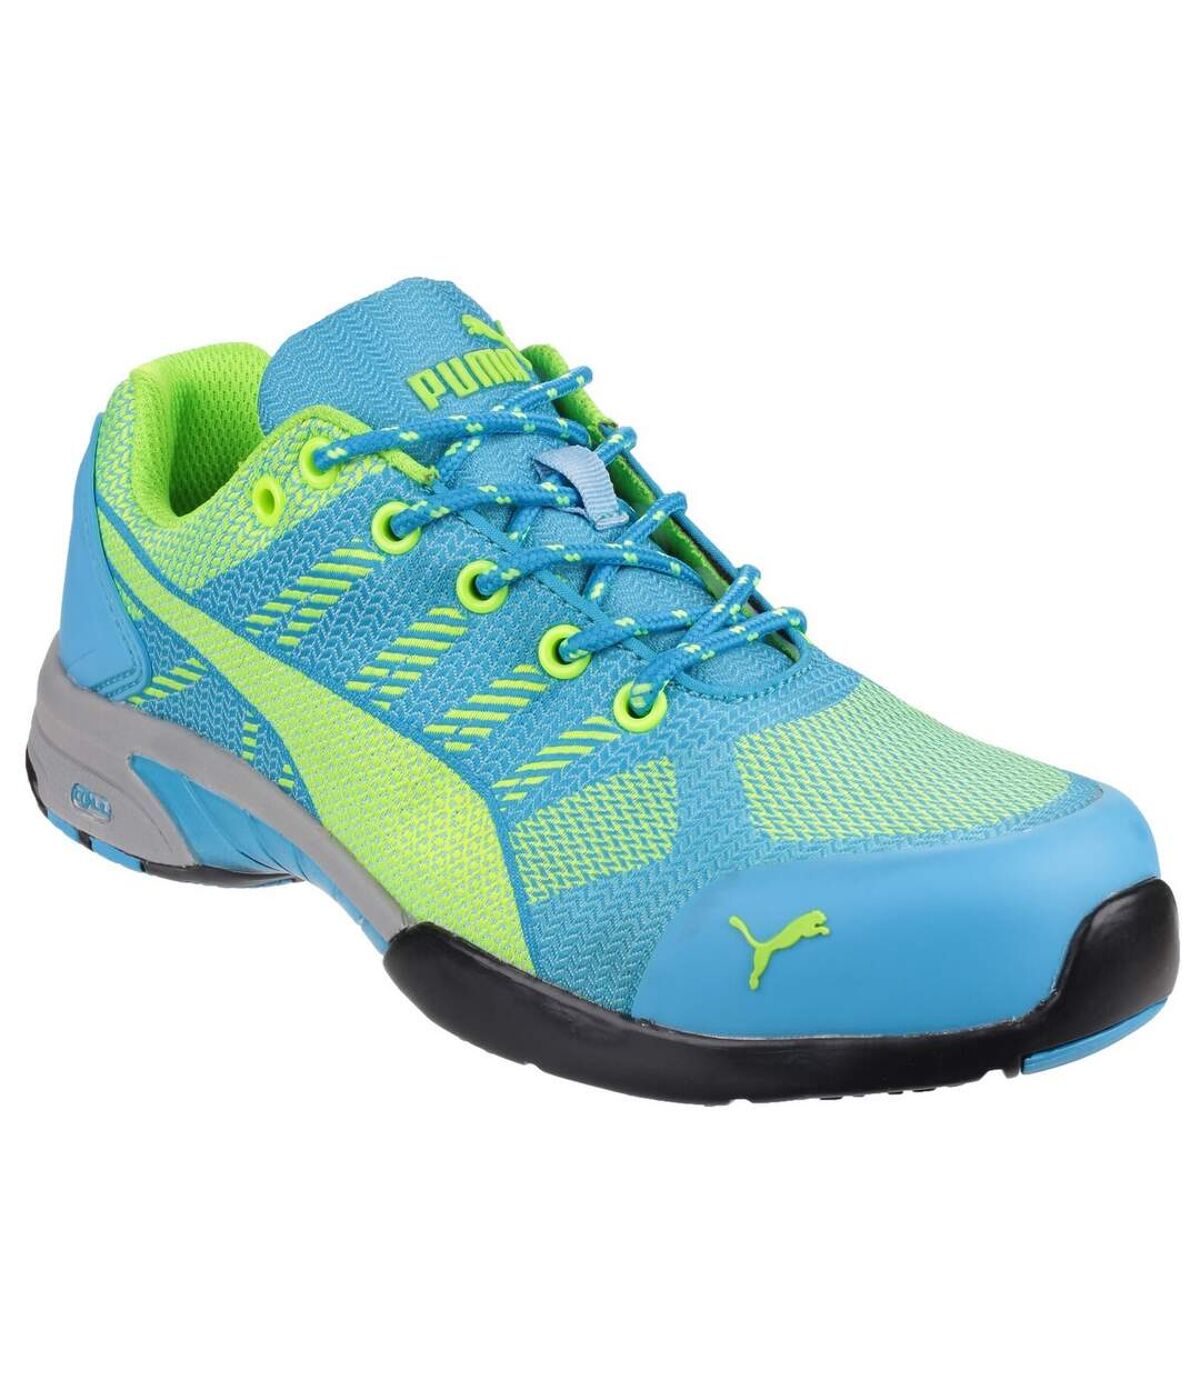 Puma Safety Womens/Ladies Celerity Knit Lace Up Safety Trainers/Sneakers (Blue) - UTFS3851